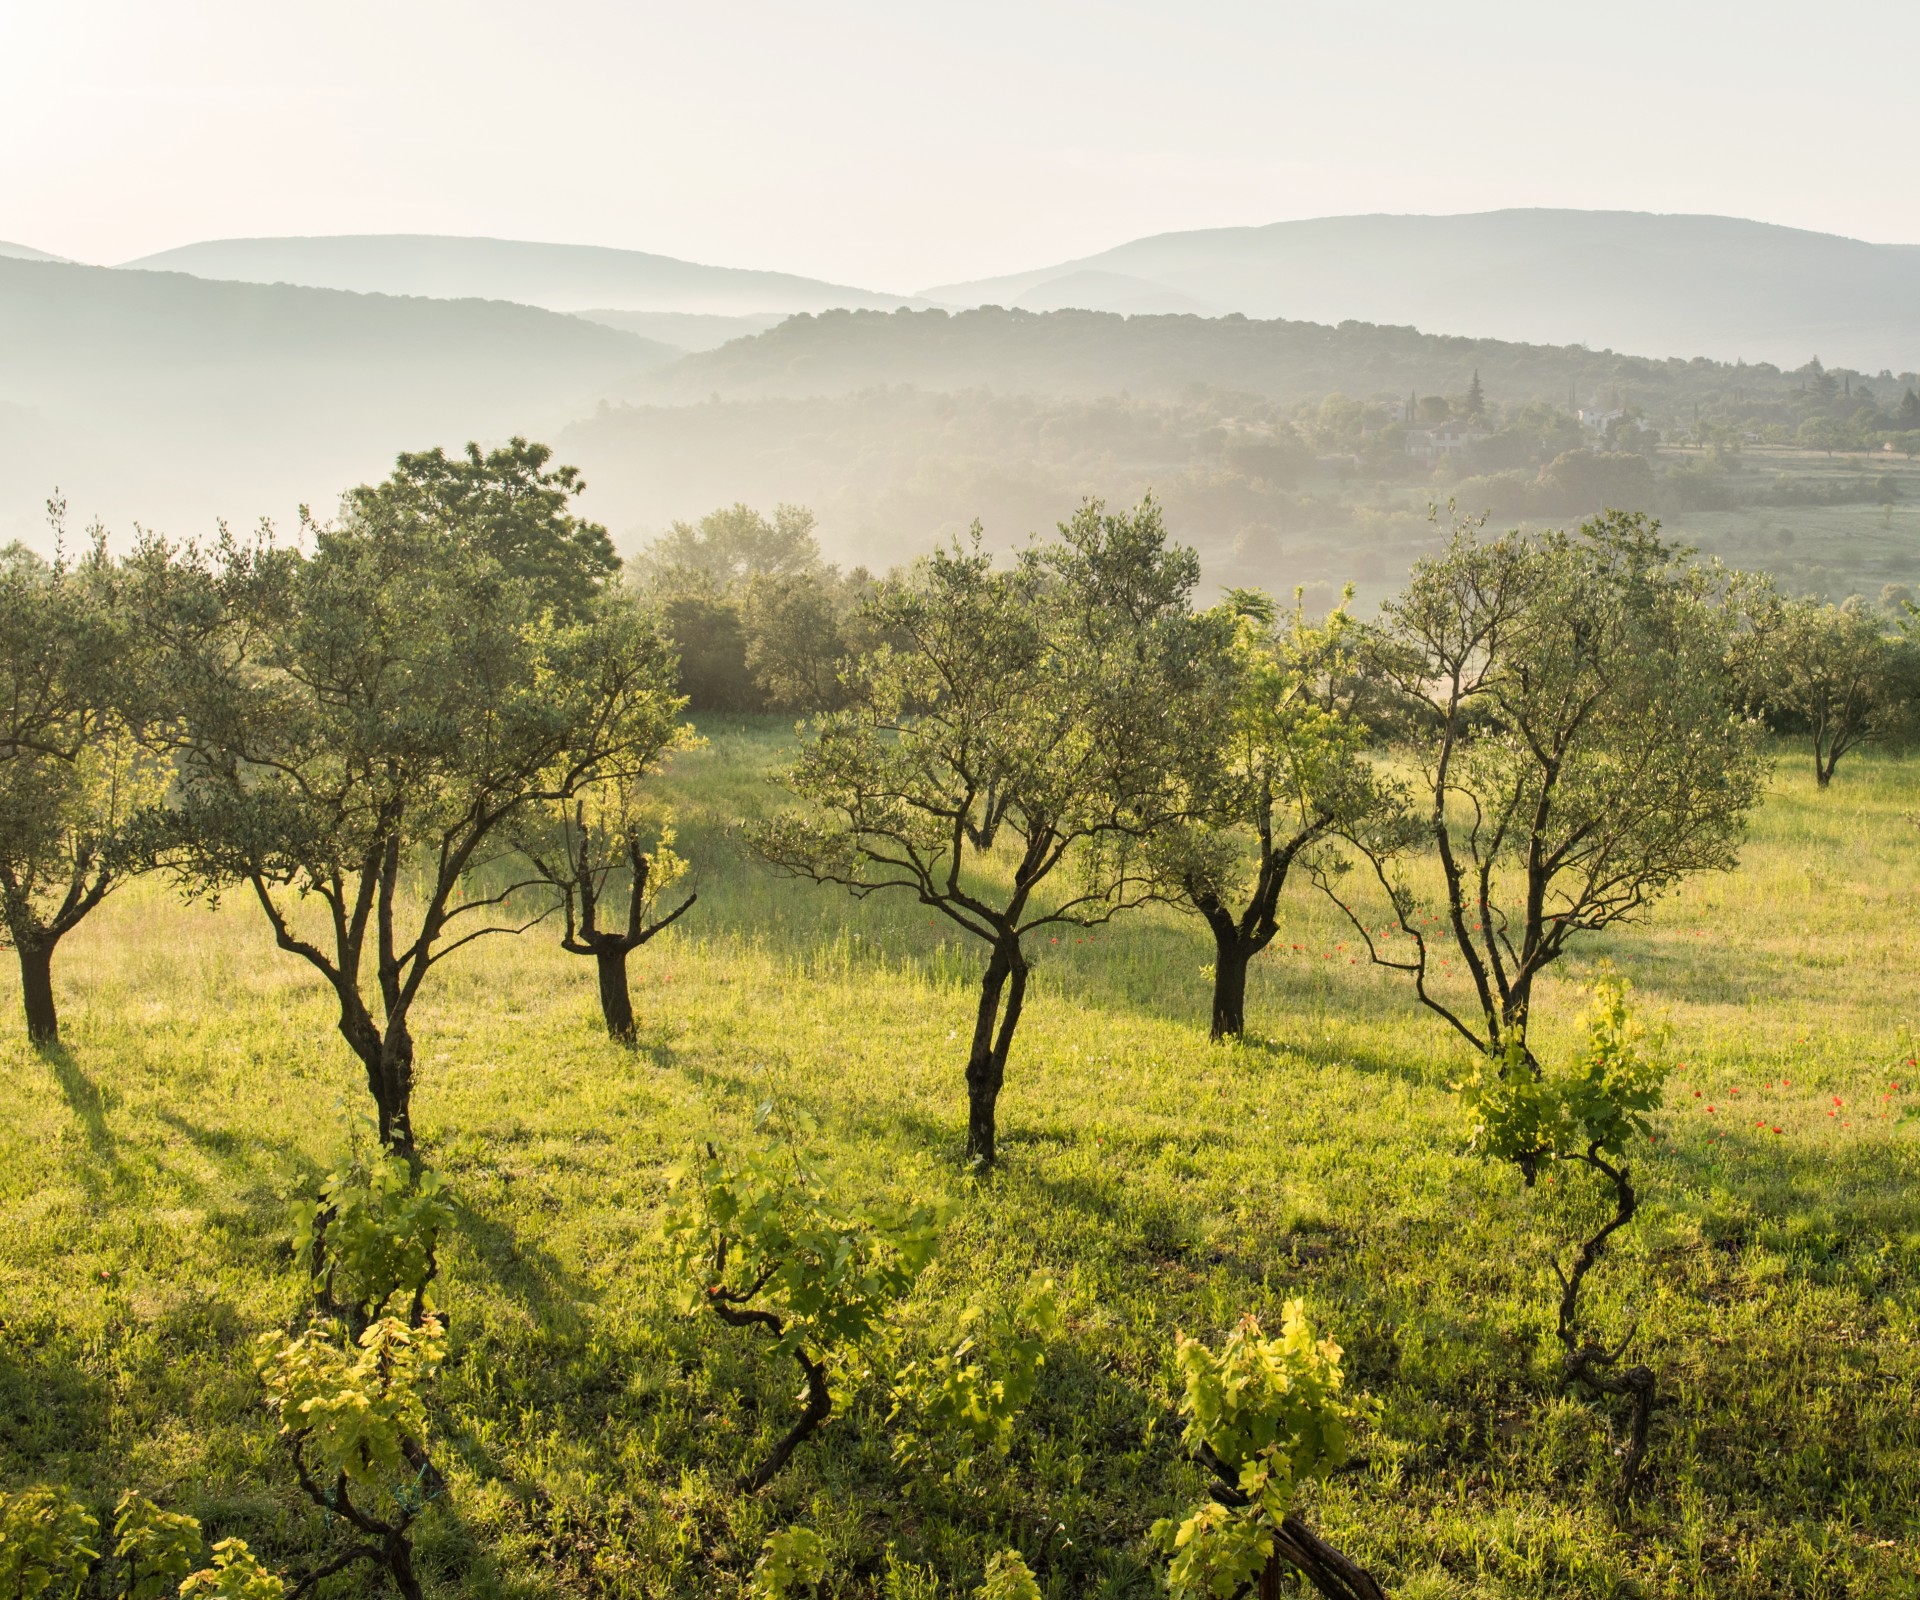 Olive groves on green meadow in front of misty hilly landscape in the background	